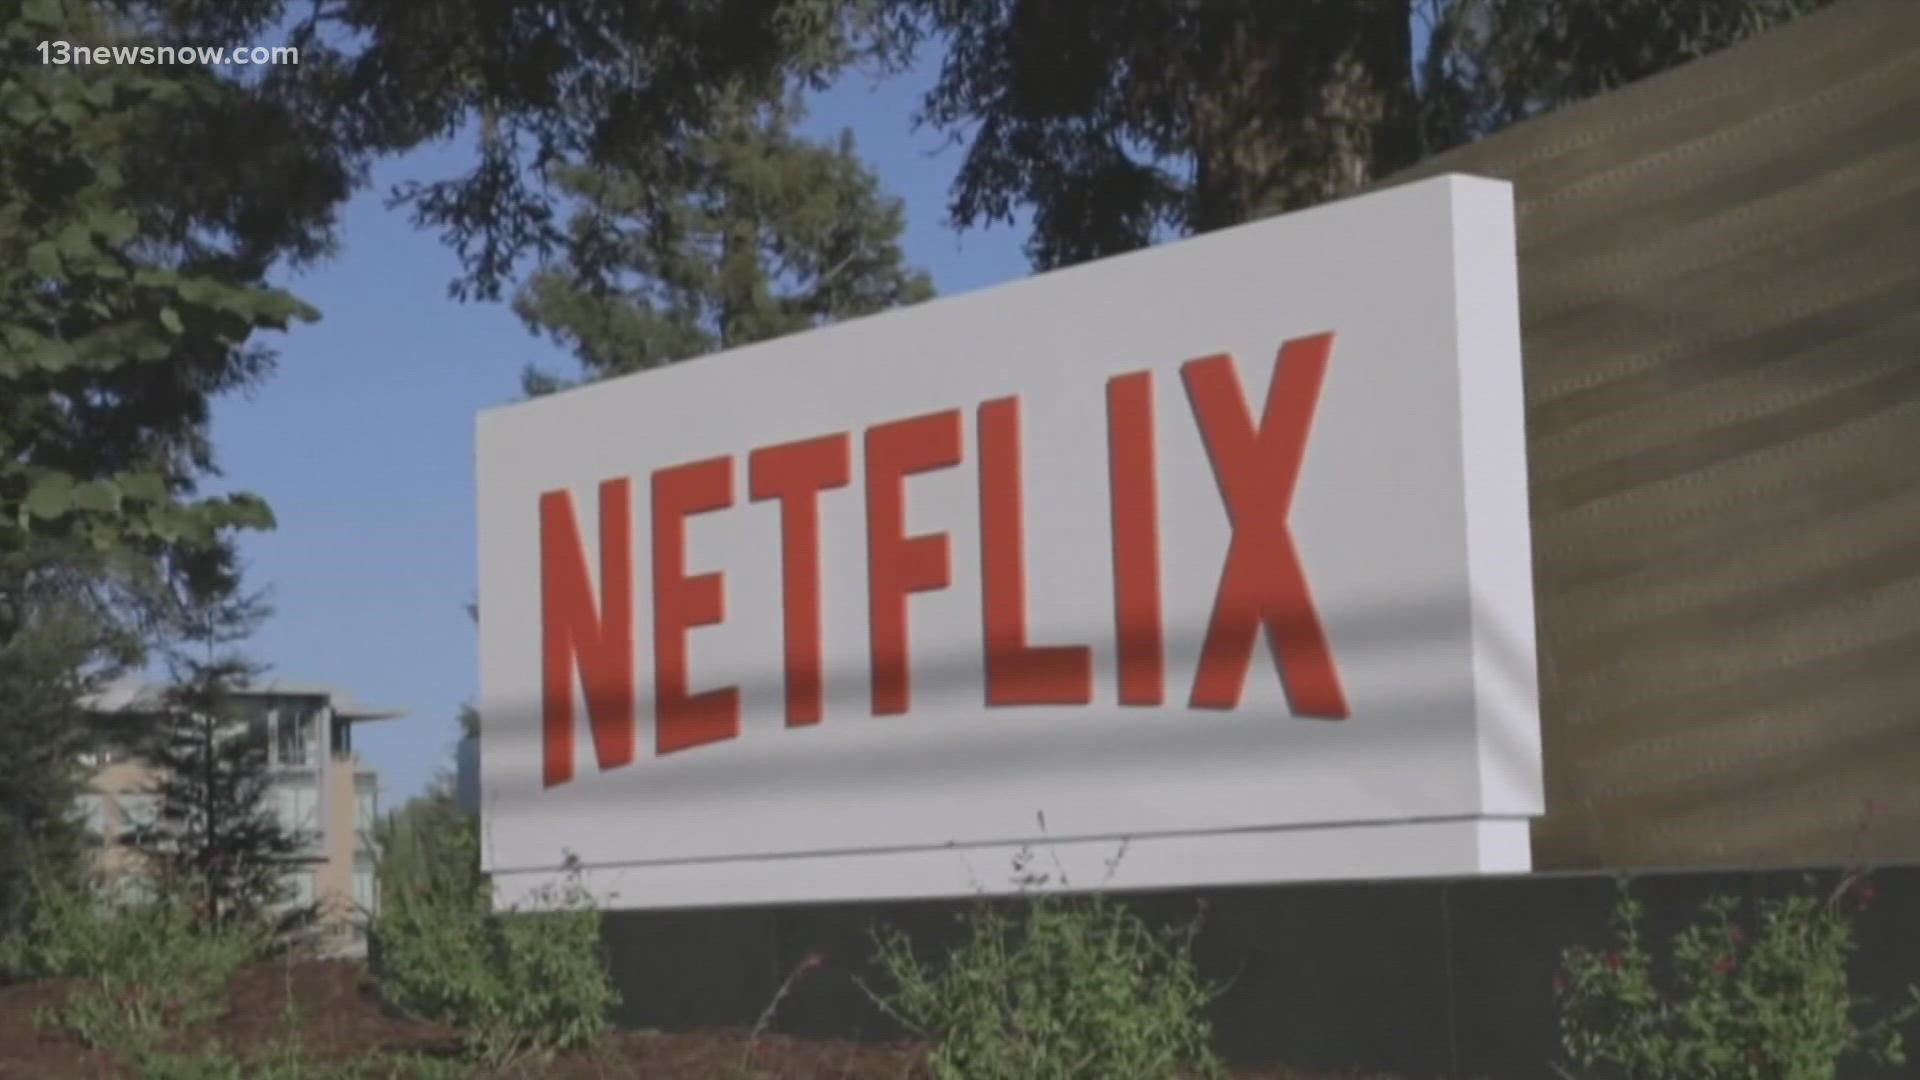 Starting next year, Netflix said that they will roll out a lower-tier plan that is largely powered by ads.